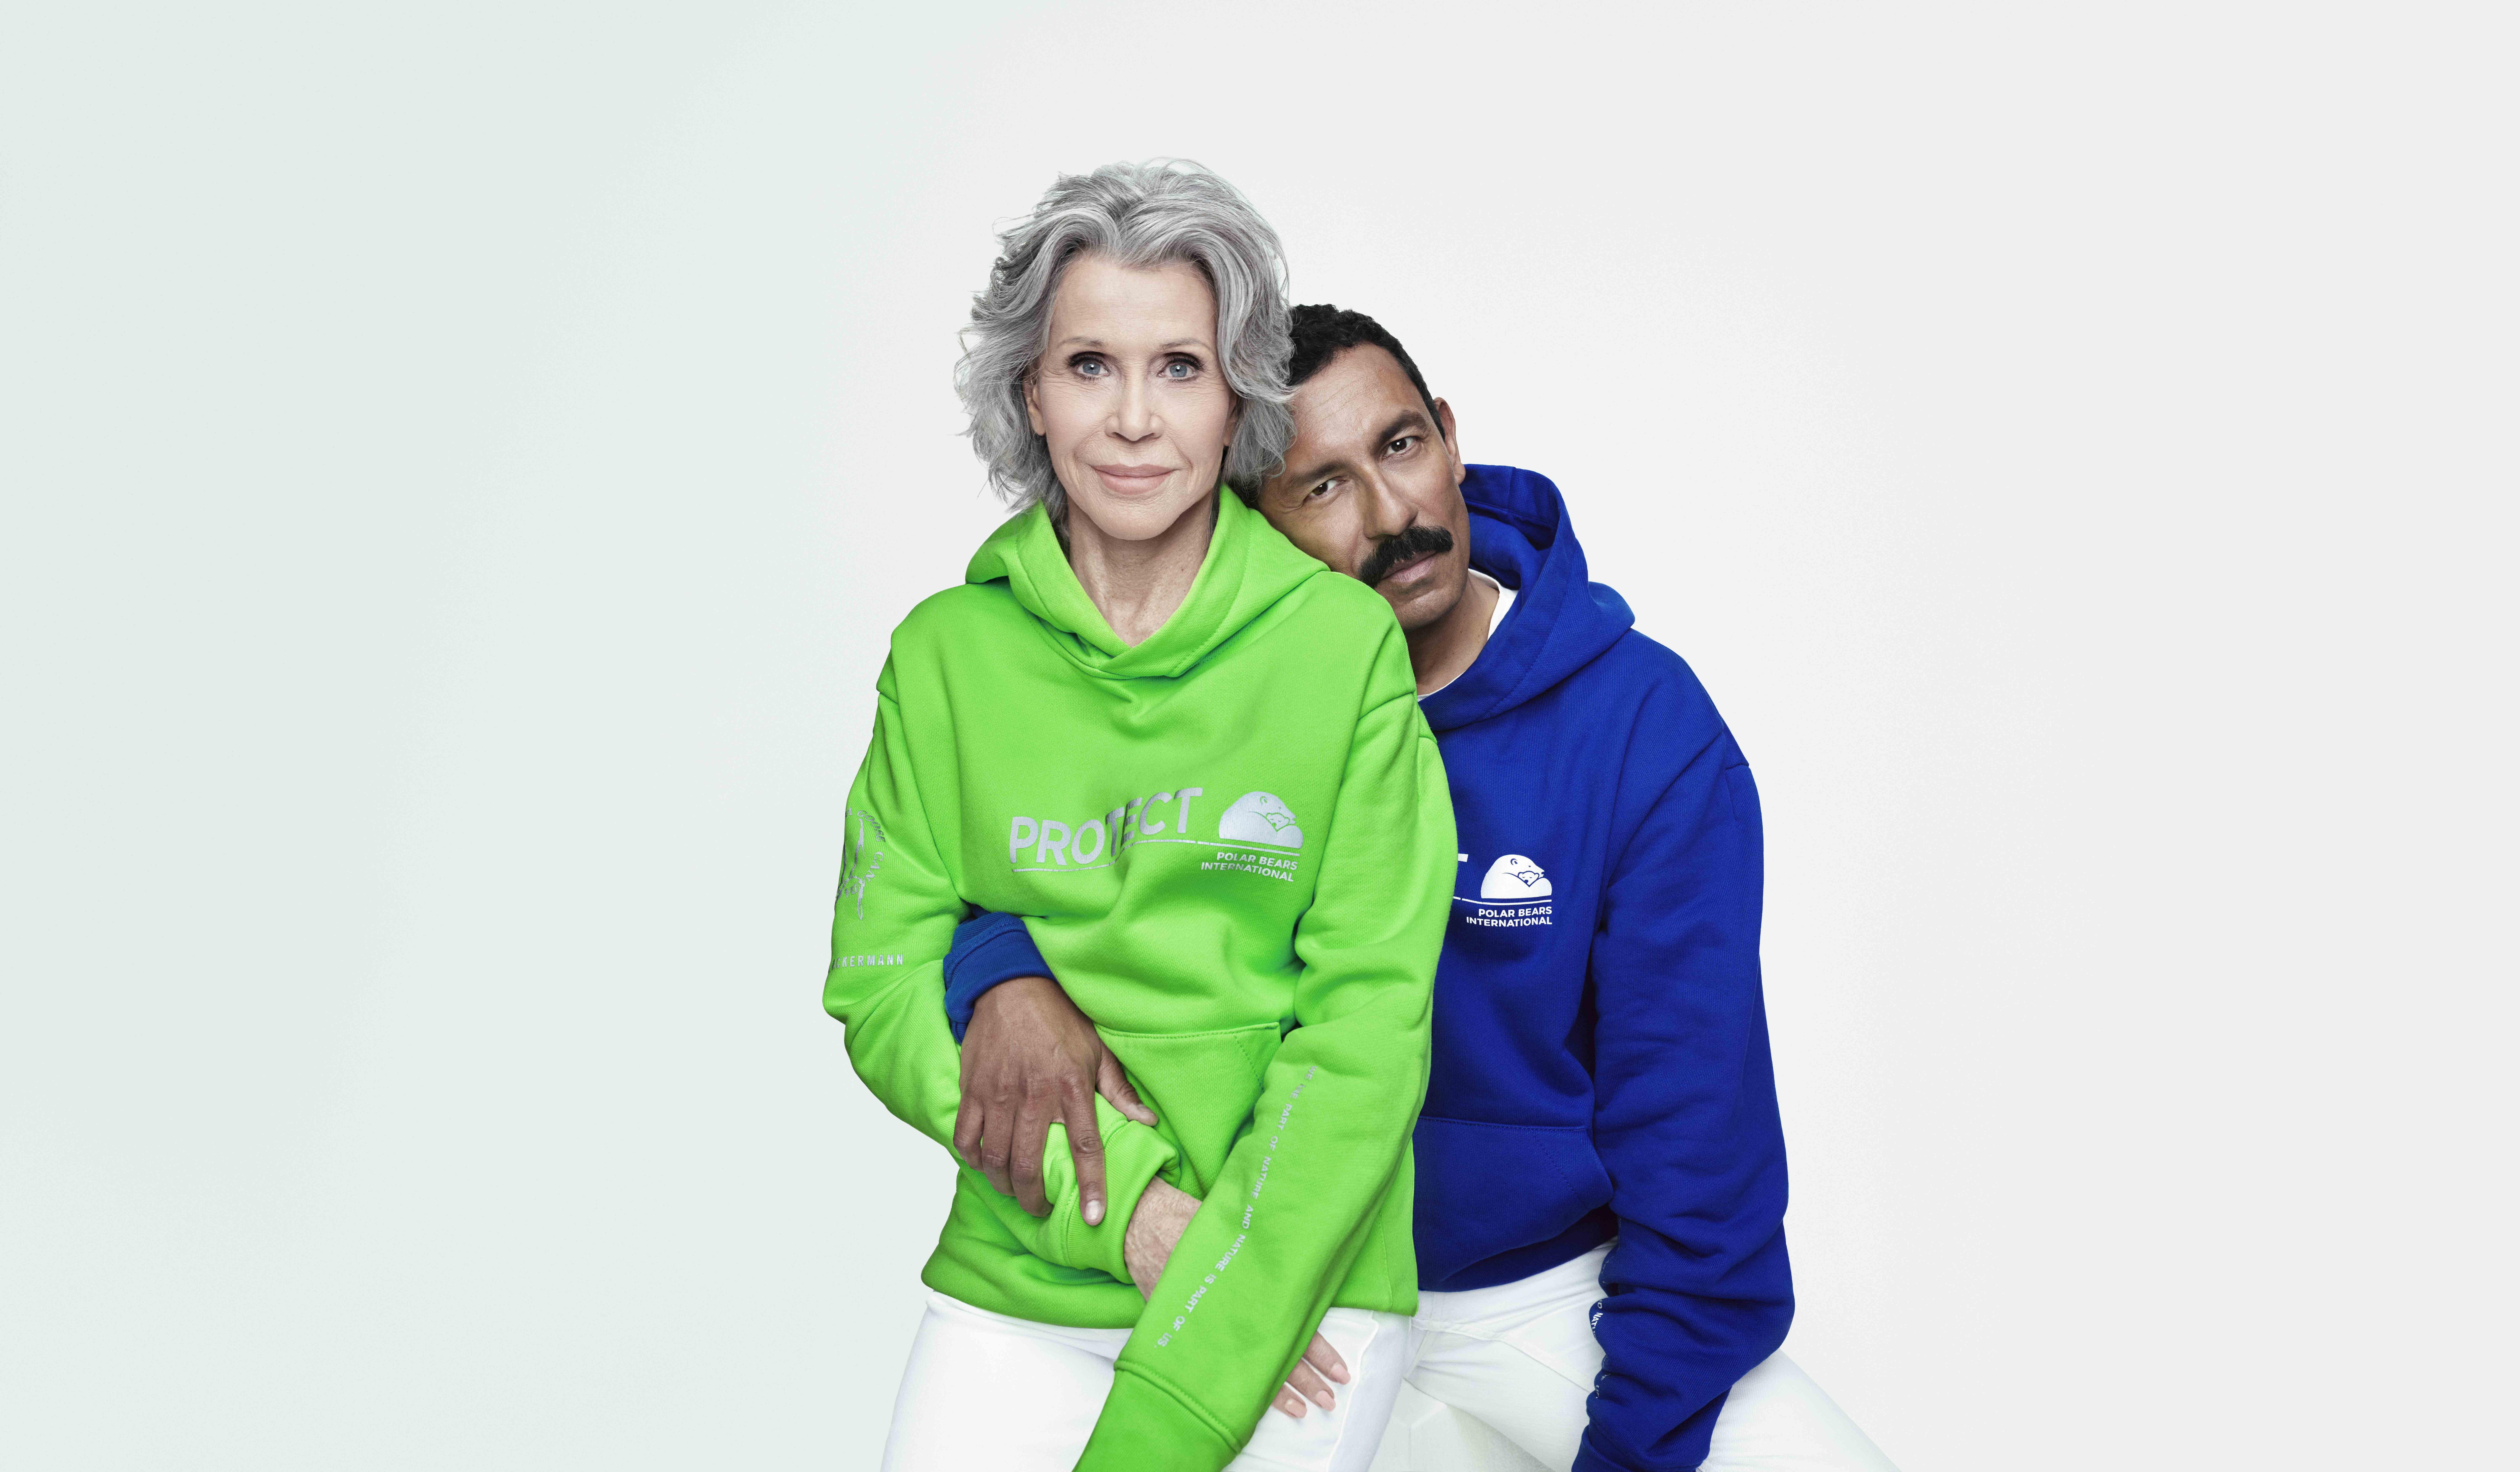 Jane Fonda Steps Up For Polar Bears in New Canada Goose Campaign